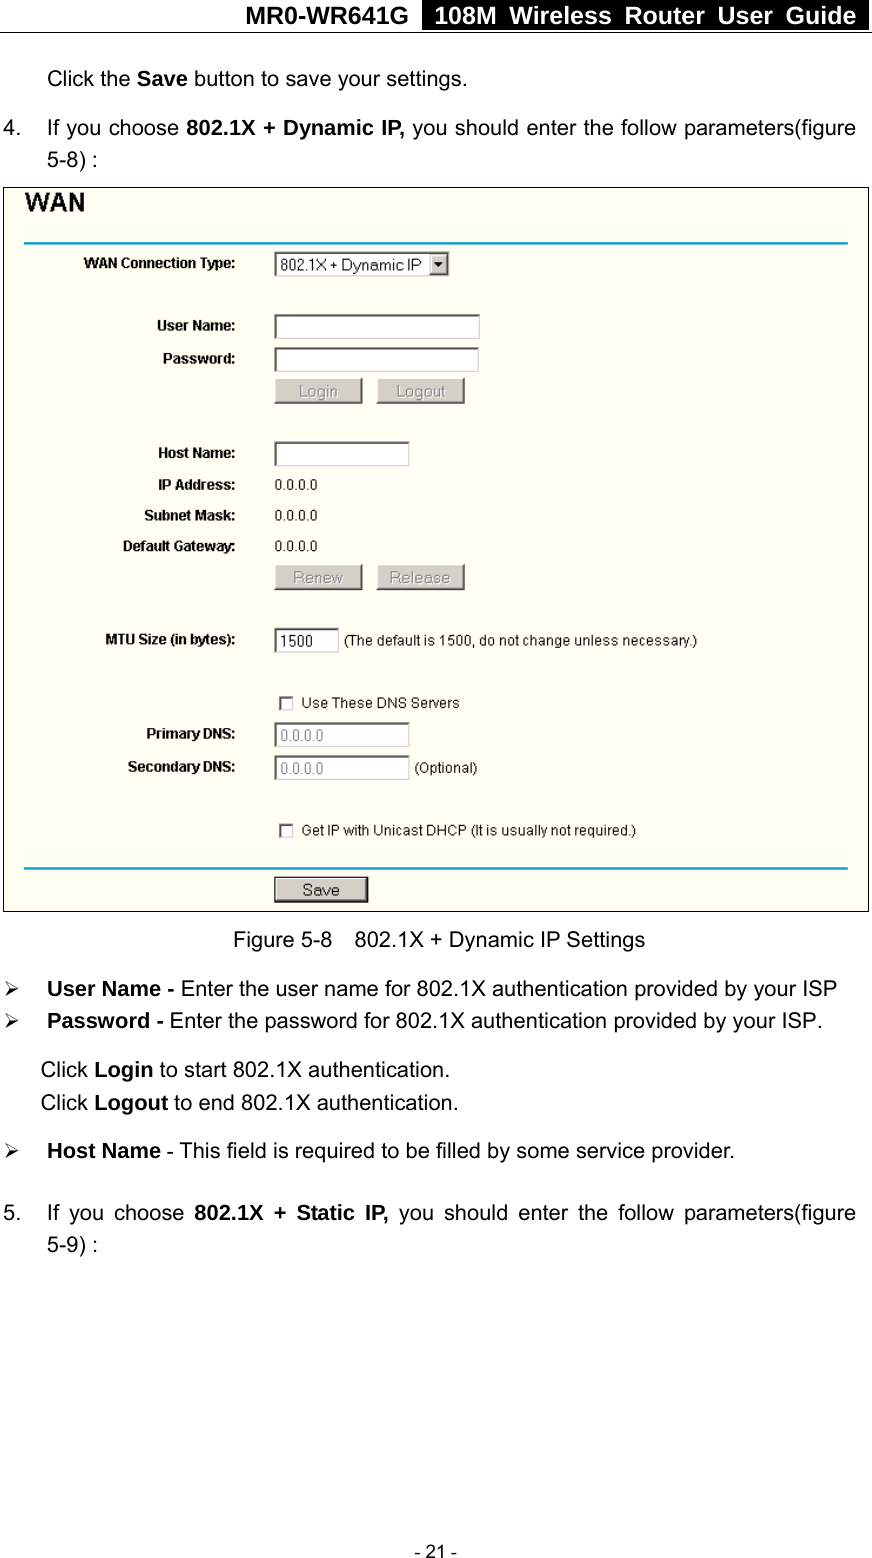 MR0-WR641G   108M Wireless Router User Guide  Click the Save button to save your settings. 4.  If you choose 802.1X + Dynamic IP, you should enter the follow parameters(figure 5-8) :  Figure 5-8    802.1X + Dynamic IP Settings ¾ User Name - Enter the user name for 802.1X authentication provided by your ISP ¾ Password - Enter the password for 802.1X authentication provided by your ISP. Click Login to start 802.1X authentication. Click Logout to end 802.1X authentication. ¾ Host Name - This field is required to be filled by some service provider. 5.  If you choose 802.1X + Static IP, you should enter the follow parameters(figure 5-9) :  - 21 - 